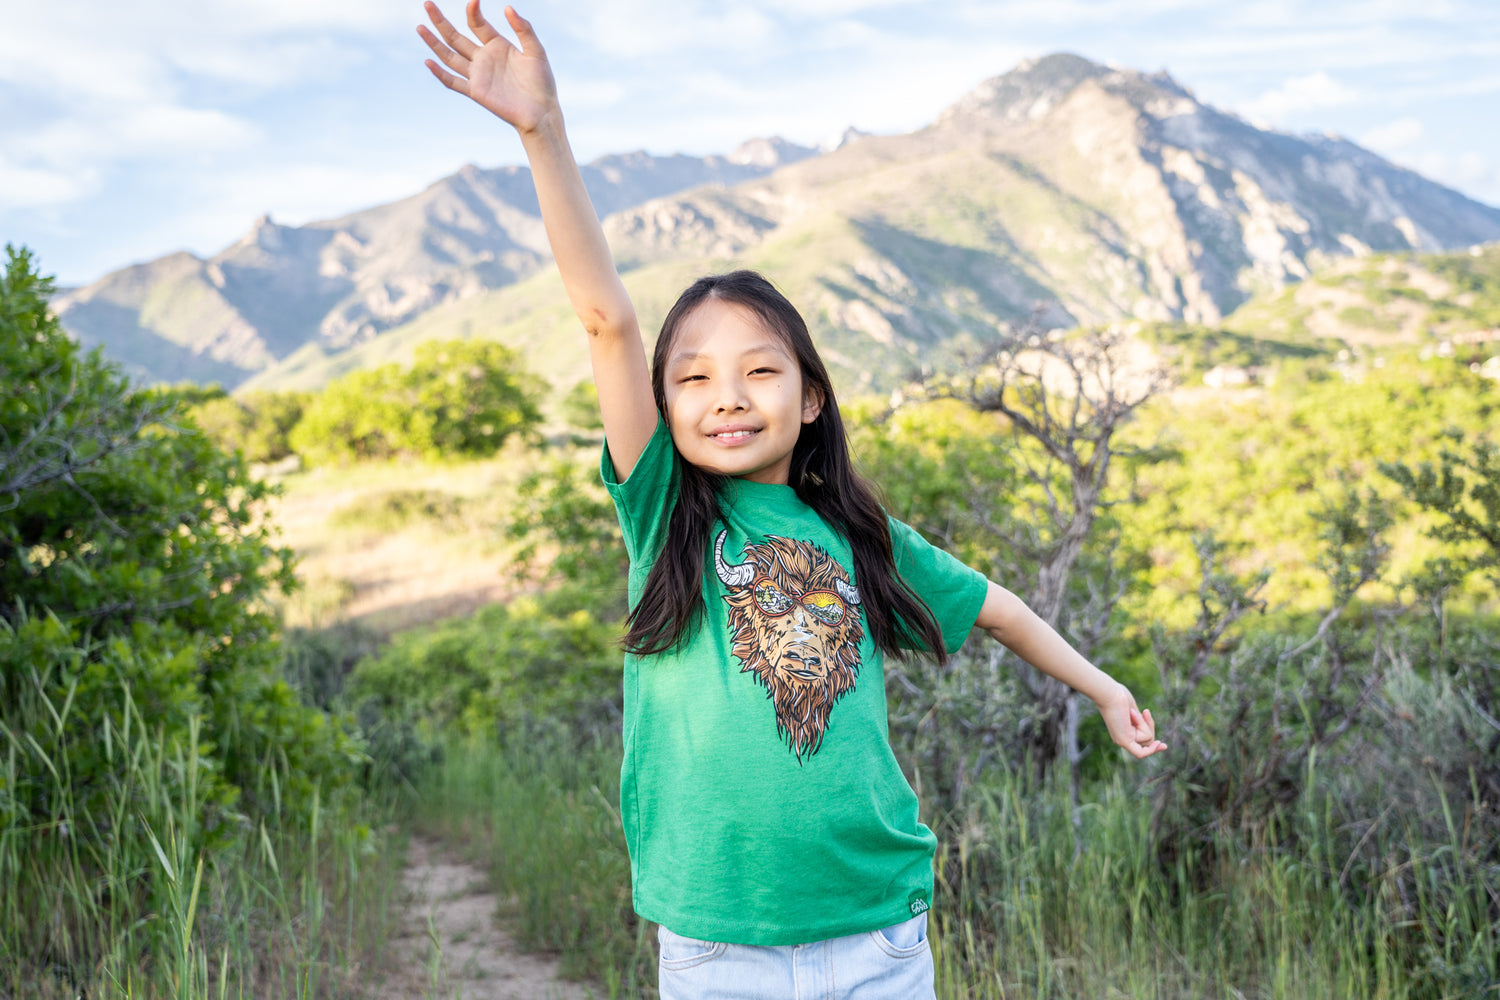 8 Tips for Hiking with Kids This Summer